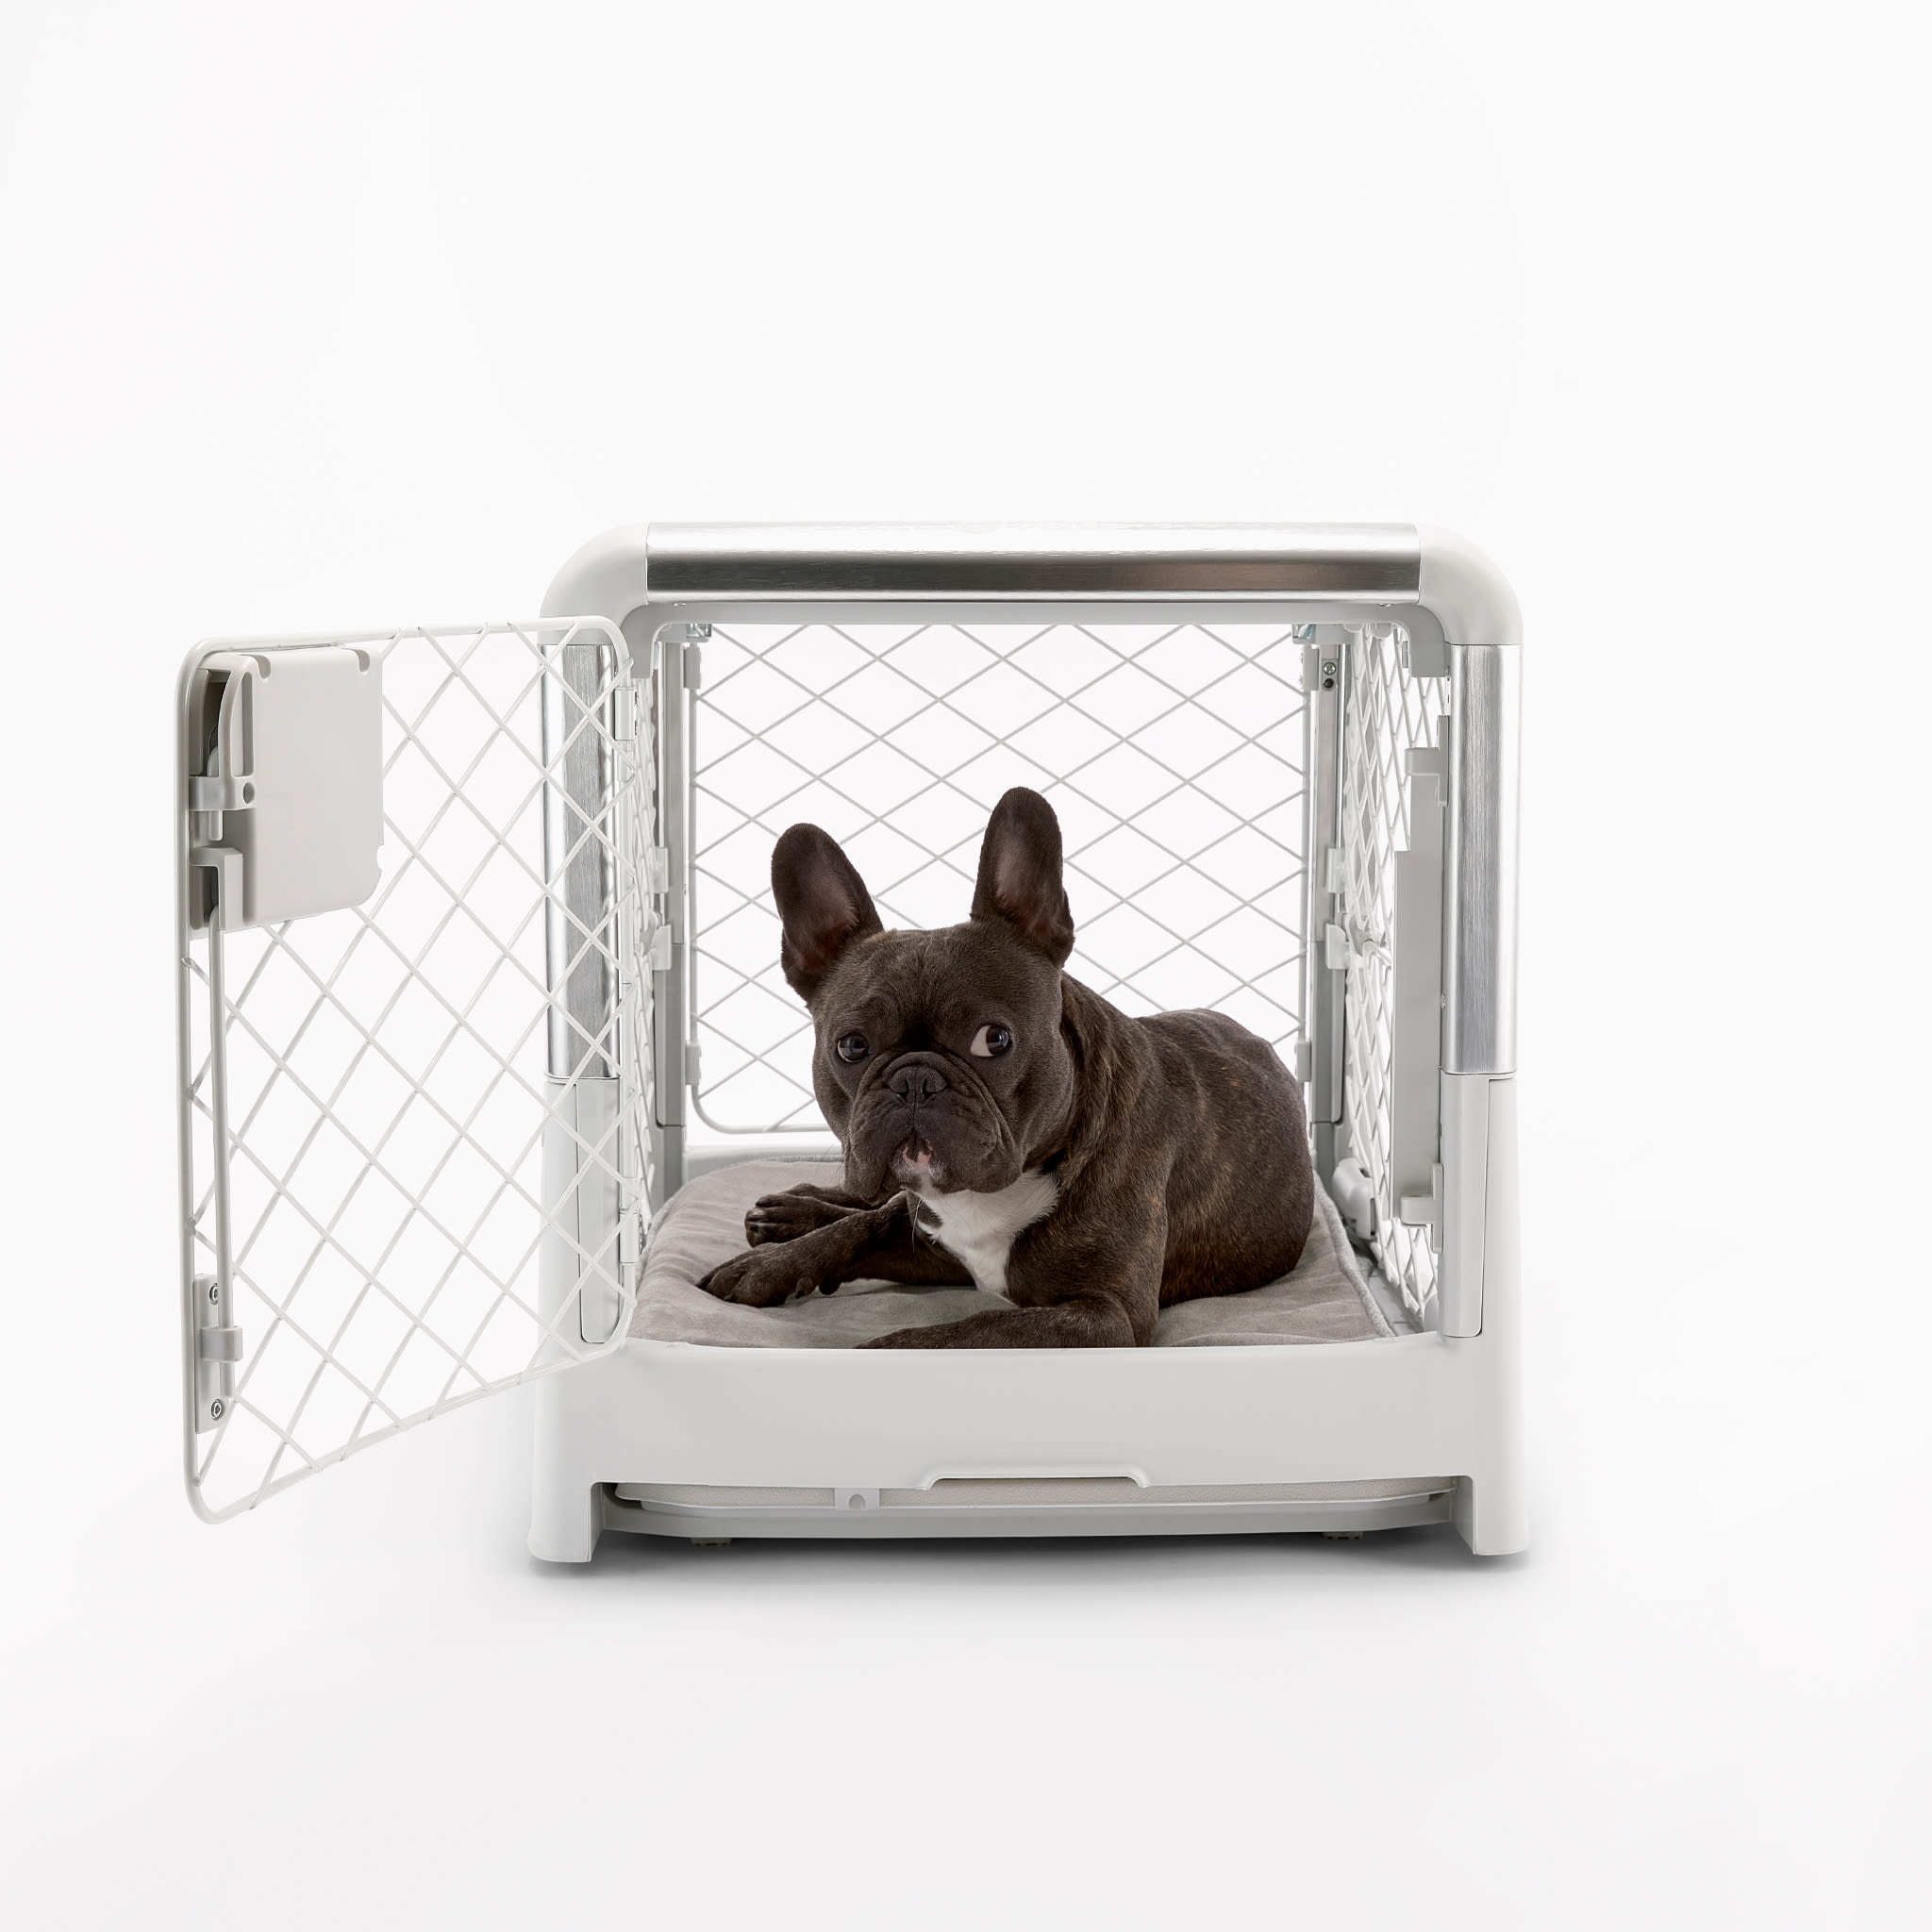 Diggs Groov Dog Training Toy I Puppy Training Aid I Crate Training Aids for  Puppies I Attaches to Crate I Reduces Anxiety I Dog Treat Dispenser I Dog